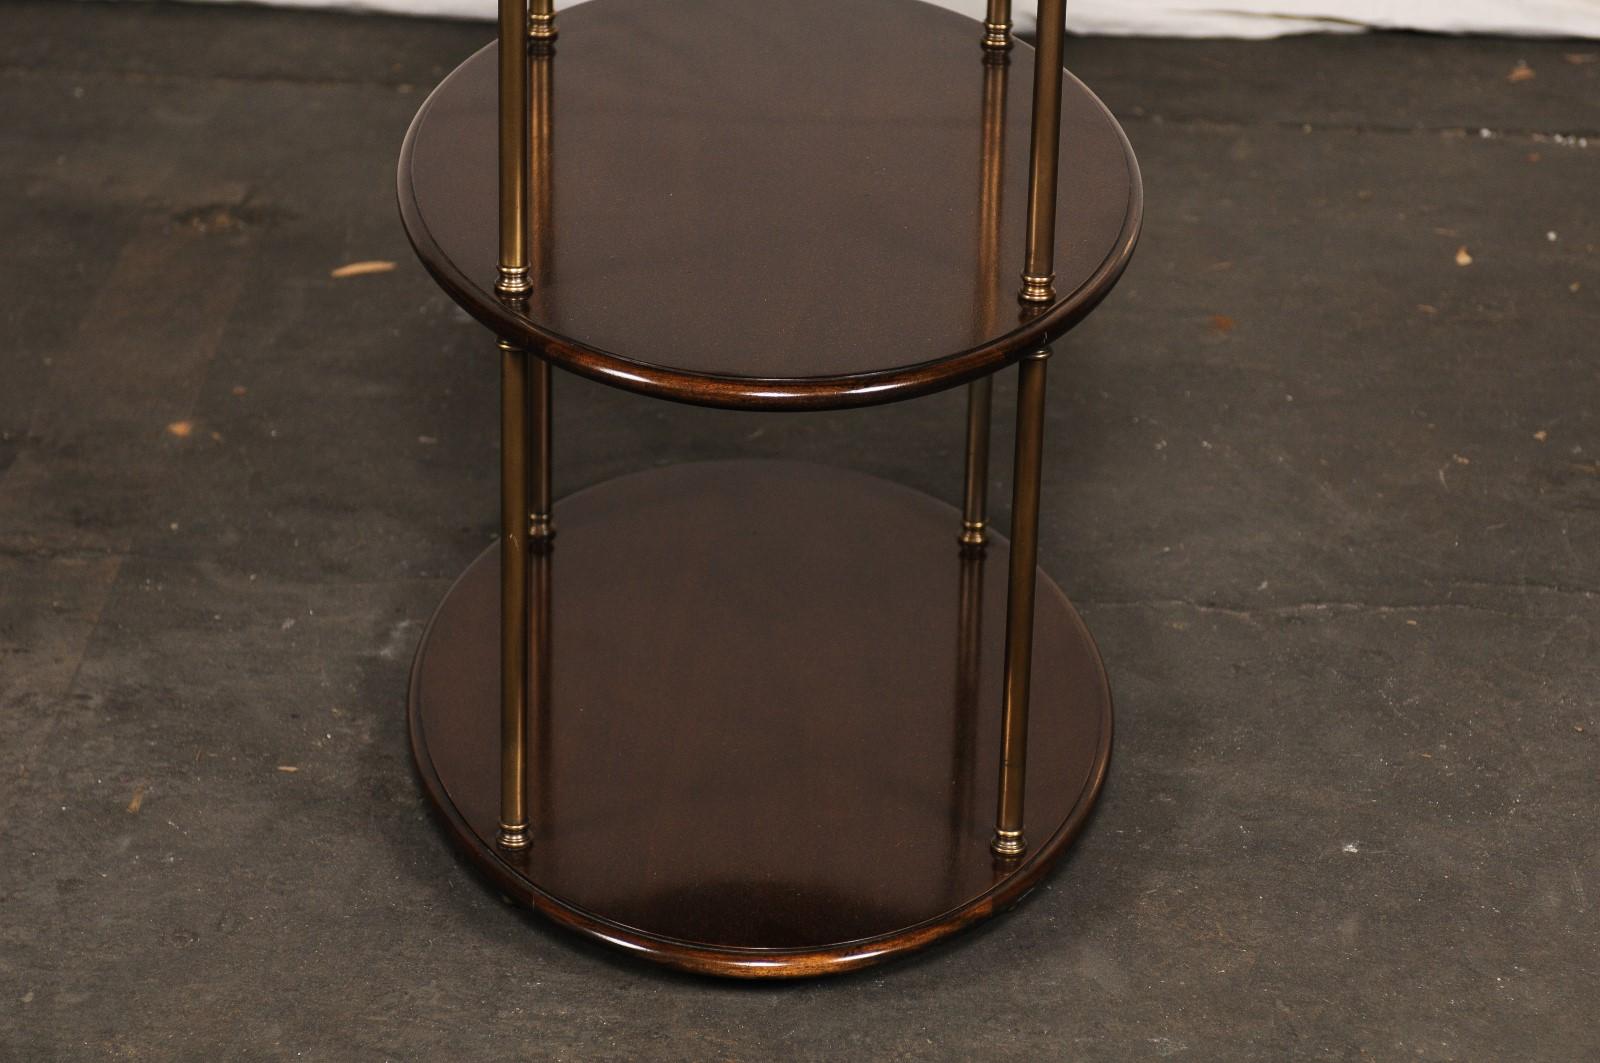 19th-20th Century English Mahogany & Brass Three-Tier Oval Étagère For Sale 4